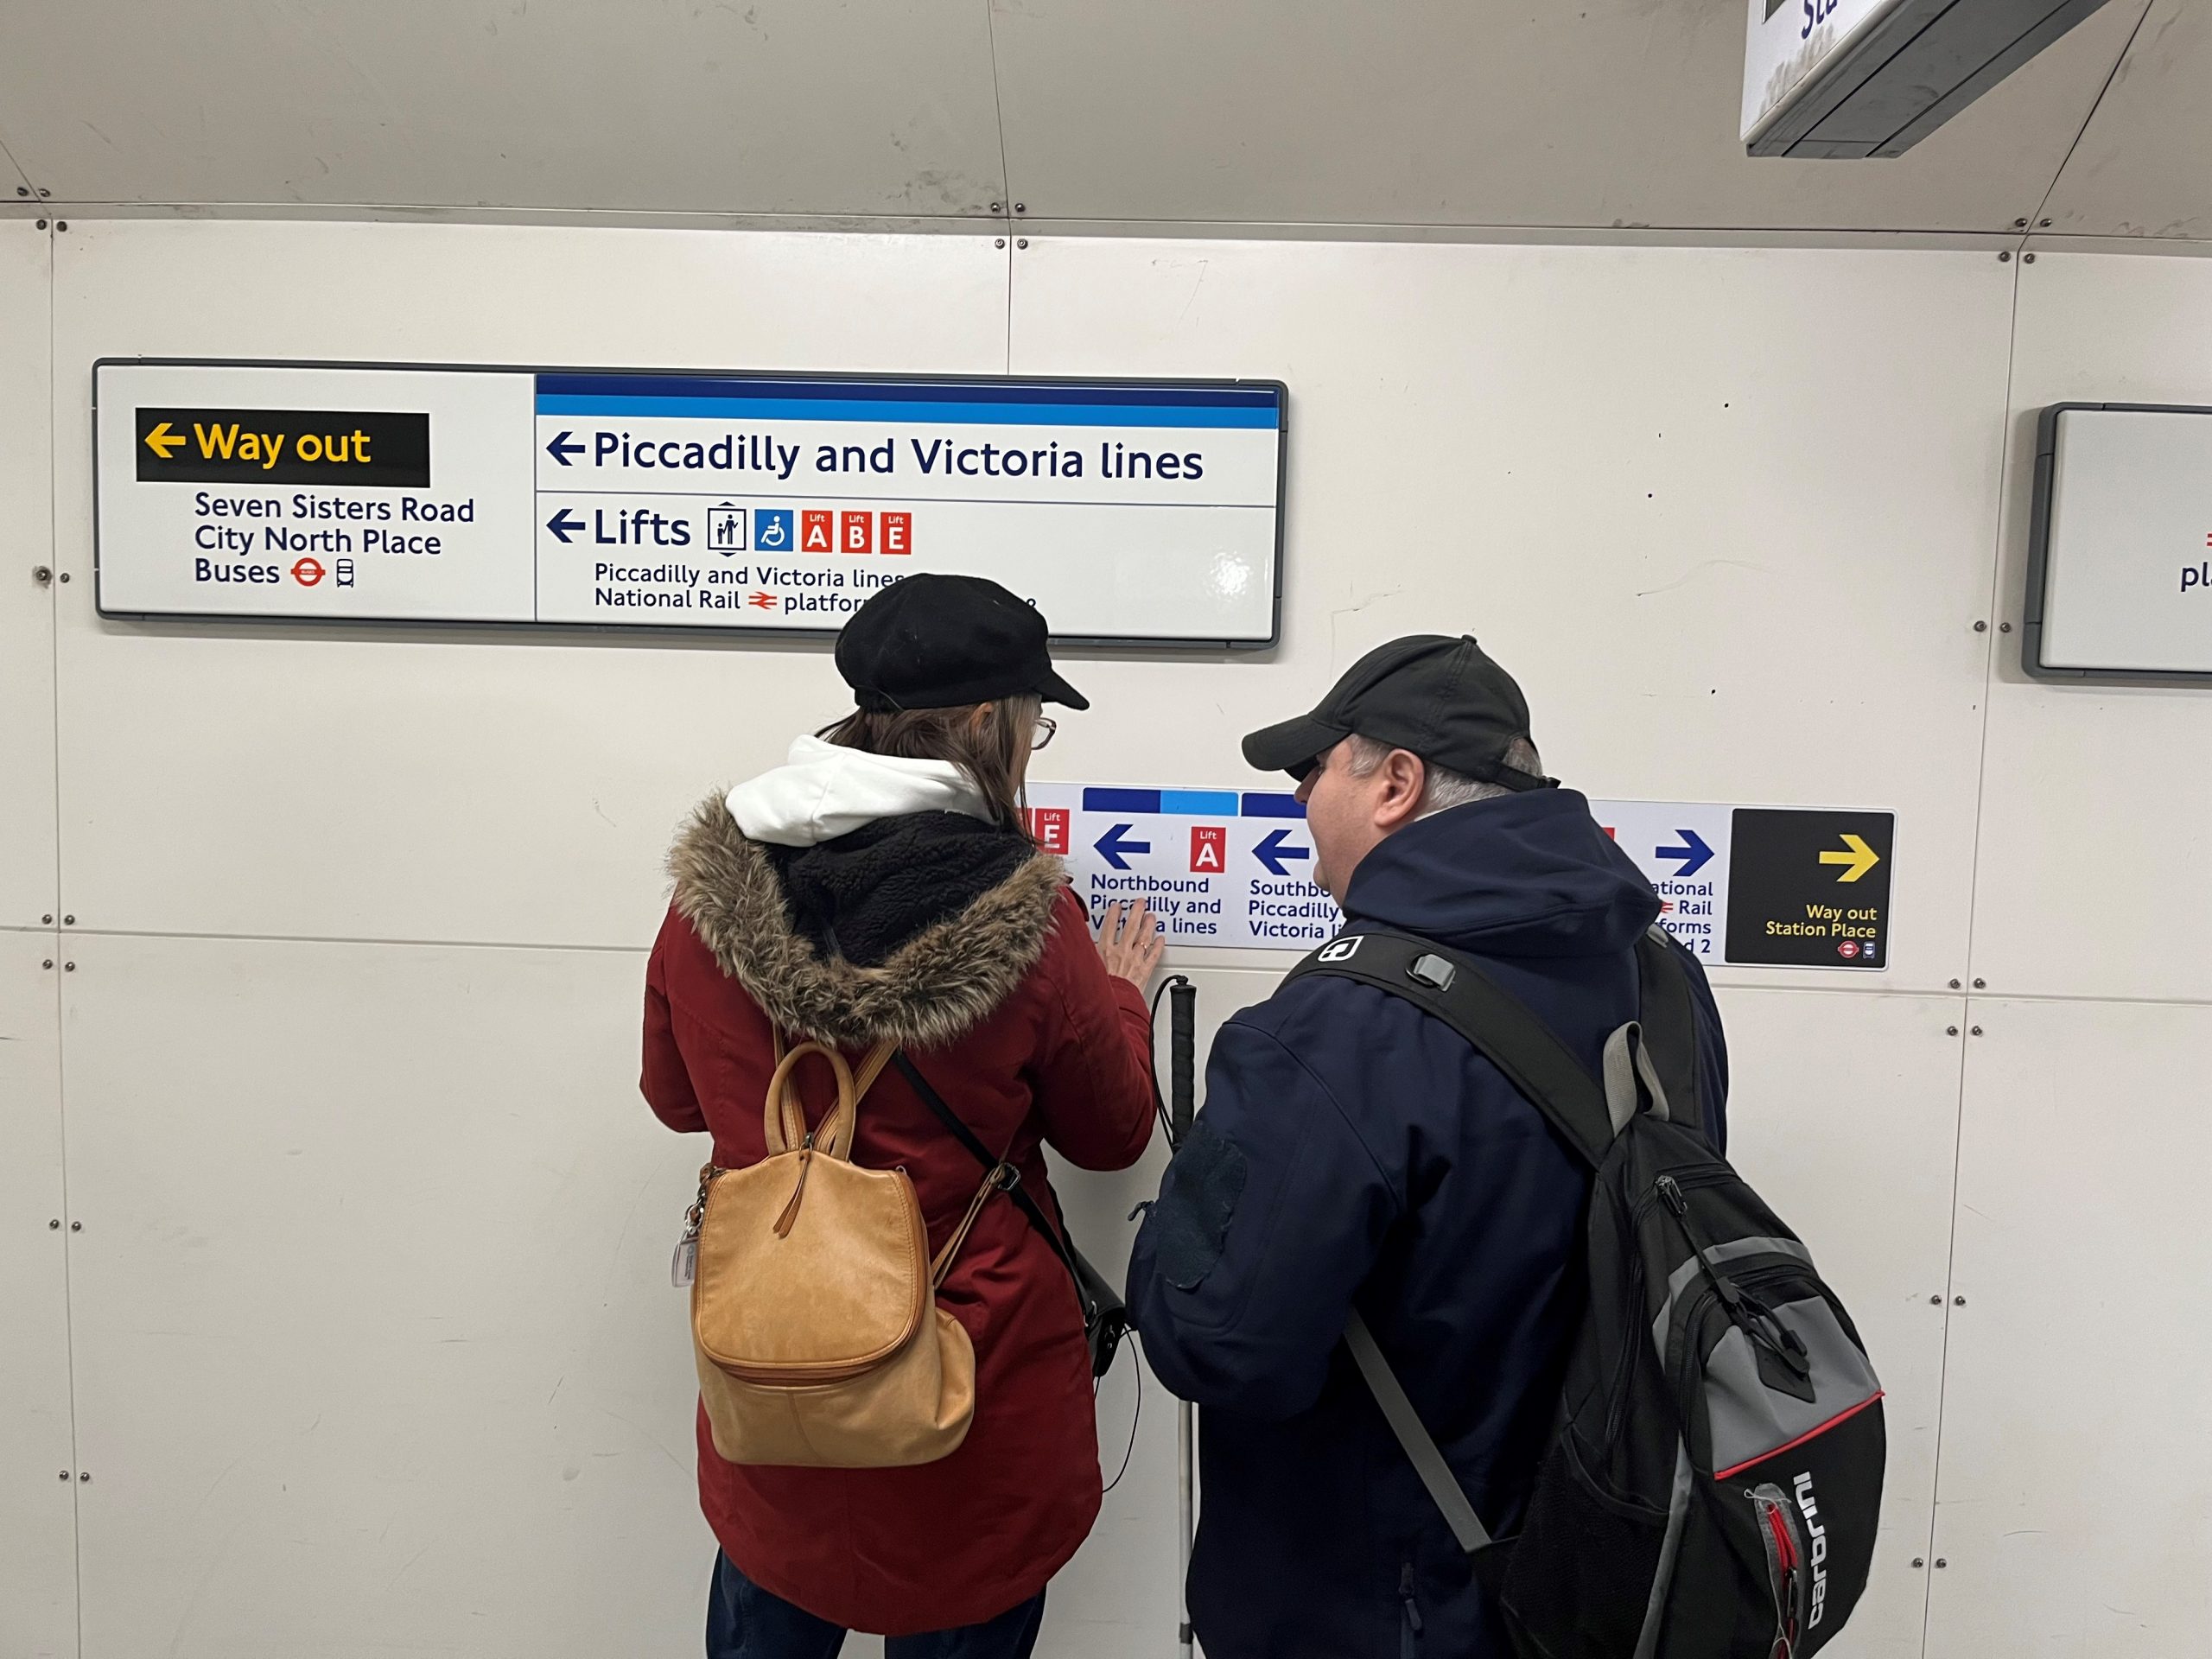 Vicky and Emmanuel, SLC members, are stood with their backs to the camera, whilst reading a sign to the underground. Vicky is touching the sign with her fingers as she reads it.